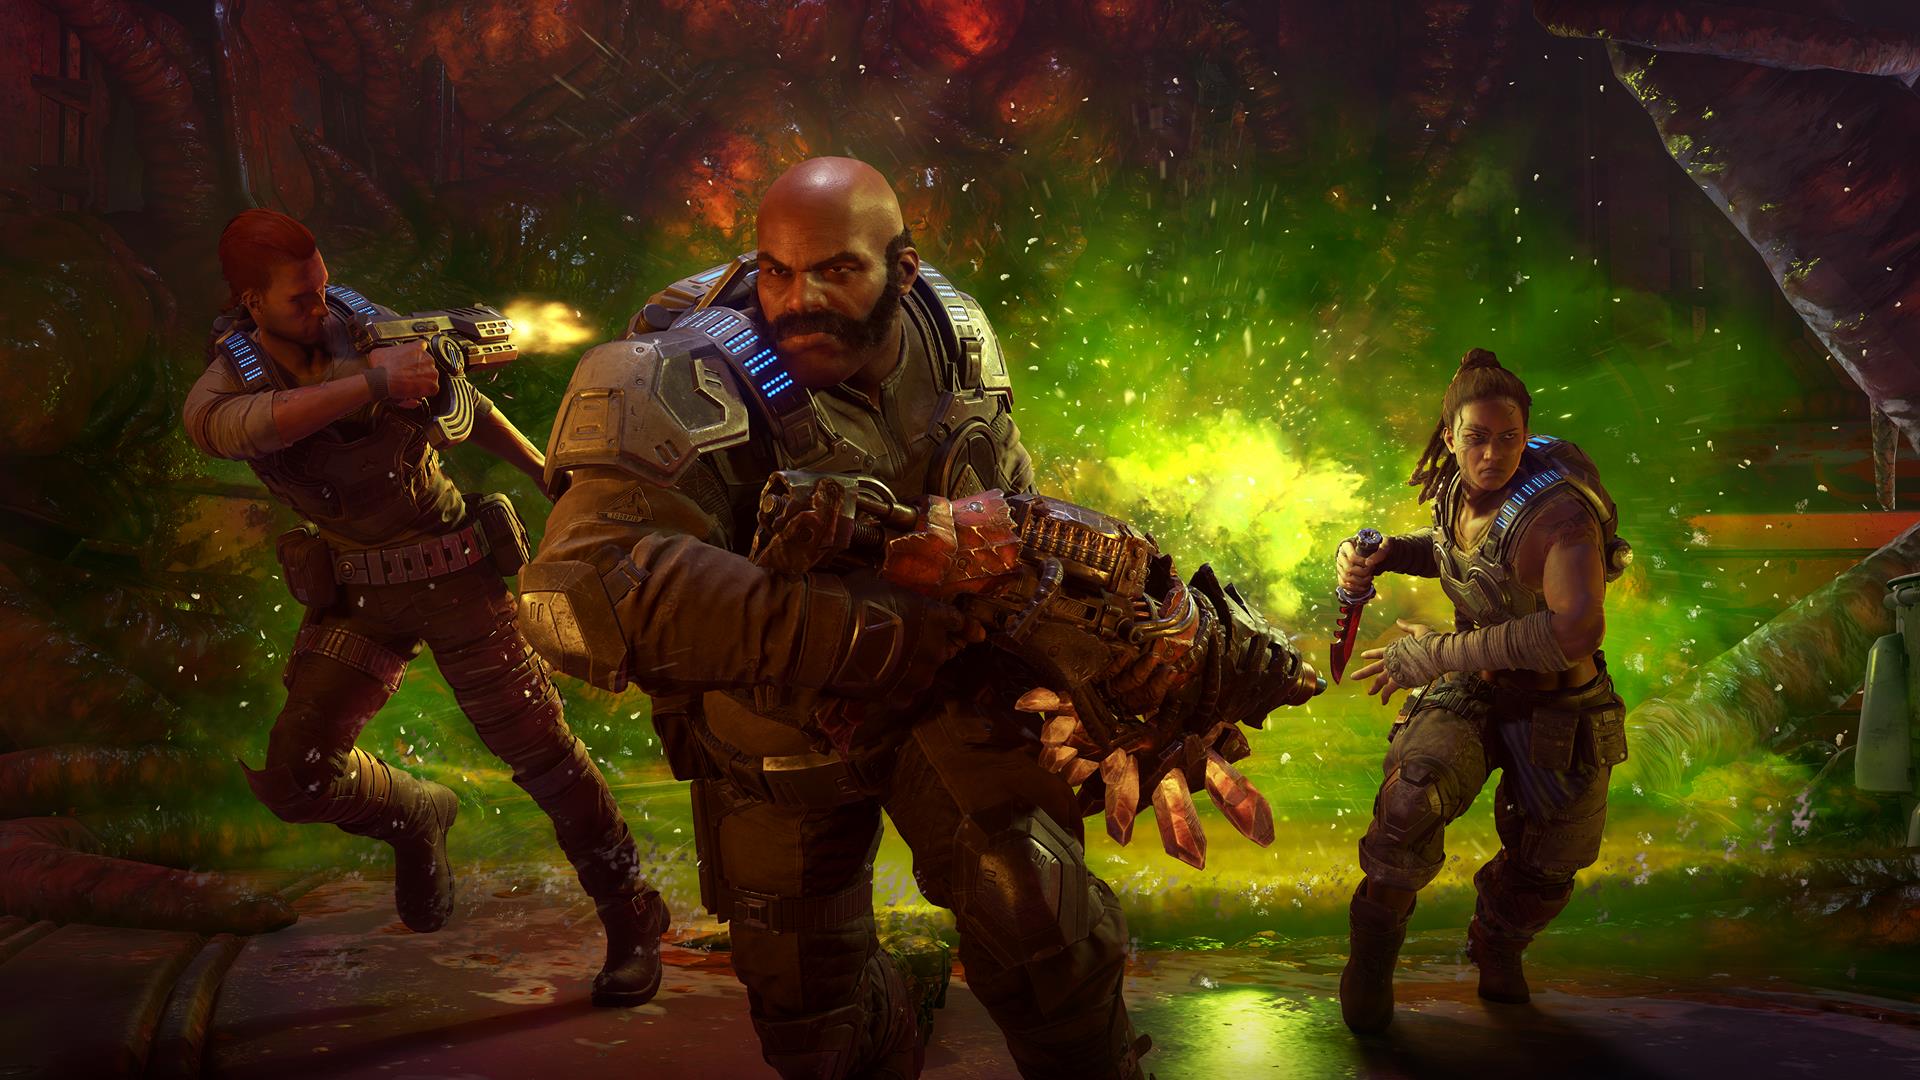 Image for Games like Gears 5 don’t feel like they’re developed with base consoles in mind